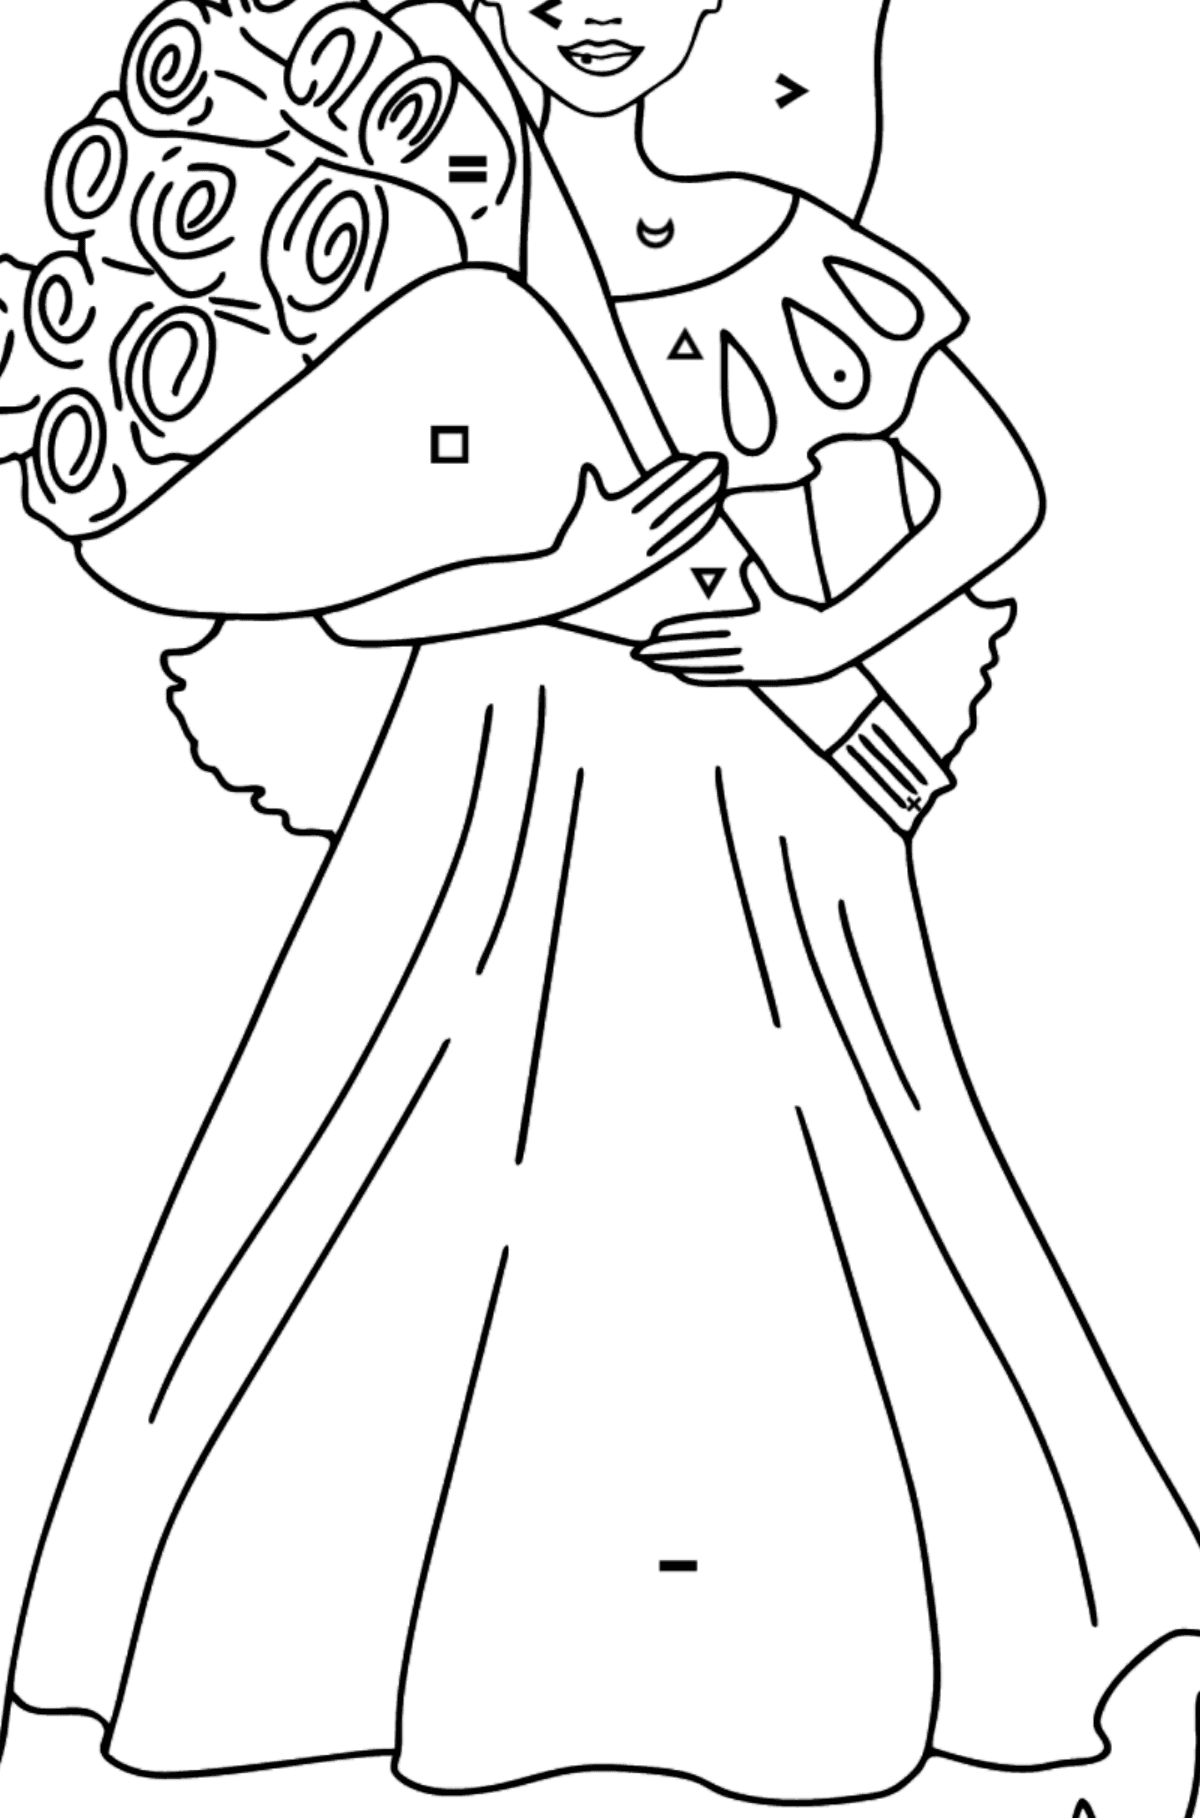 Barbie Doll and a Bouquet of Roses coloring page - Coloring by Symbols for Kids